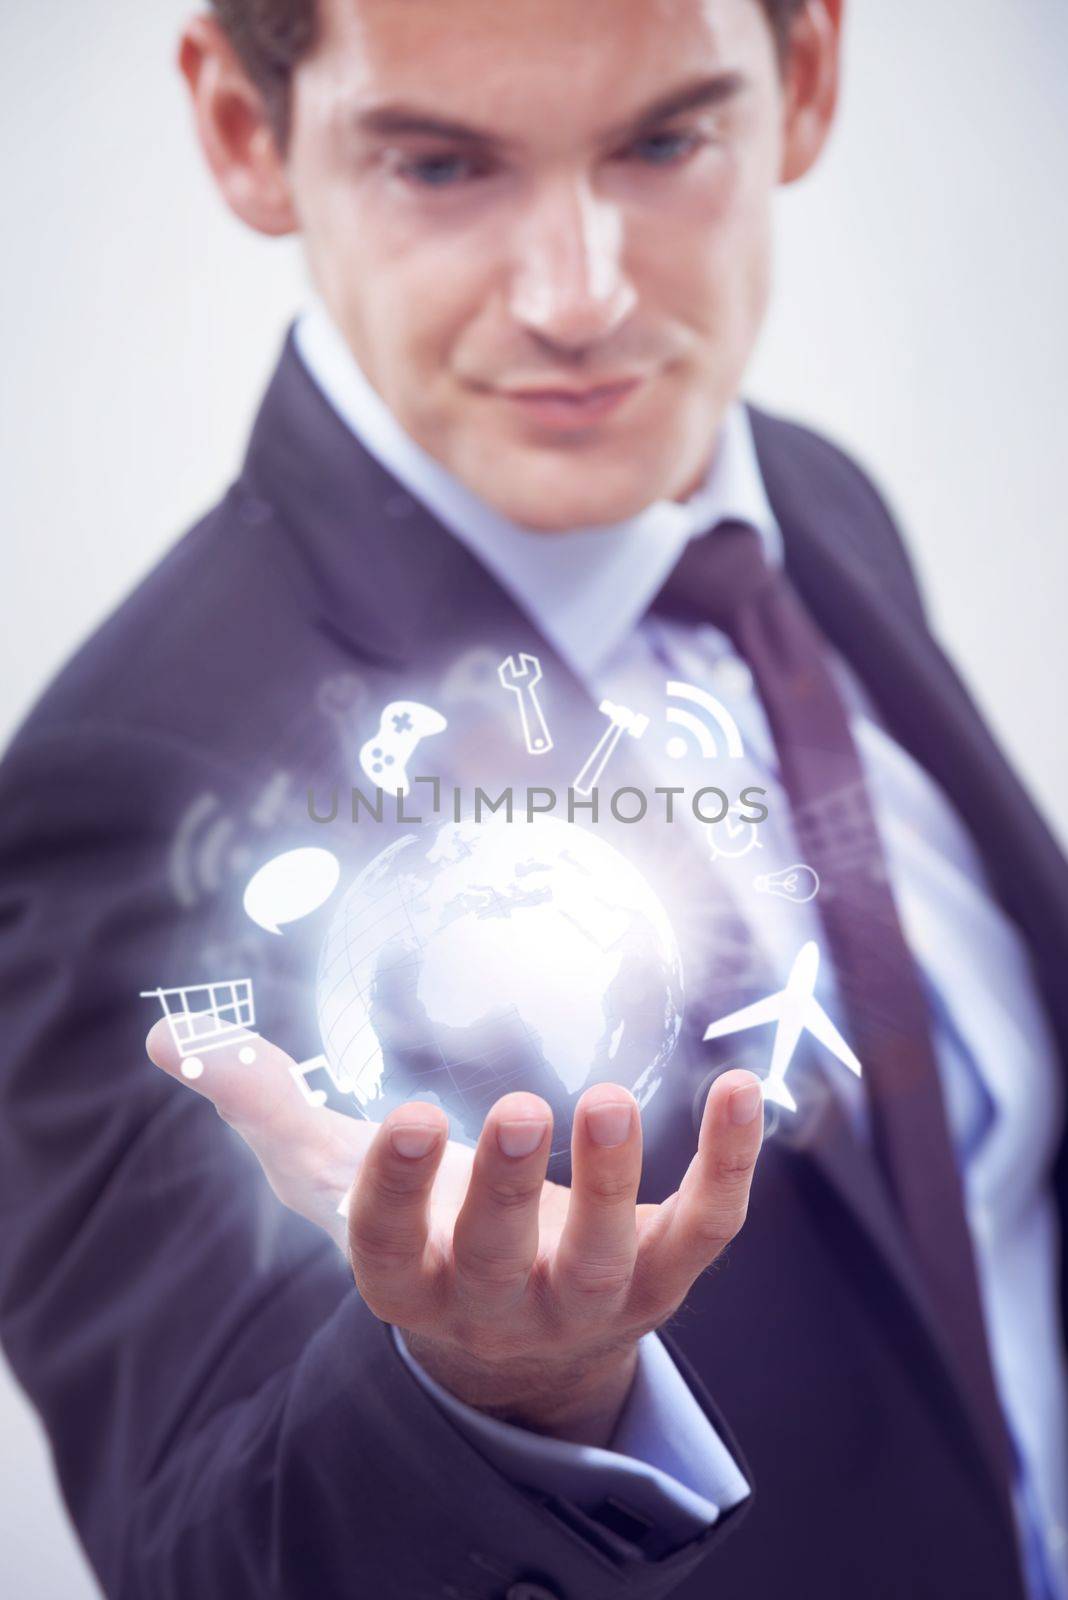 Holding the future in his. A handsome young businessman using touchscreen technology